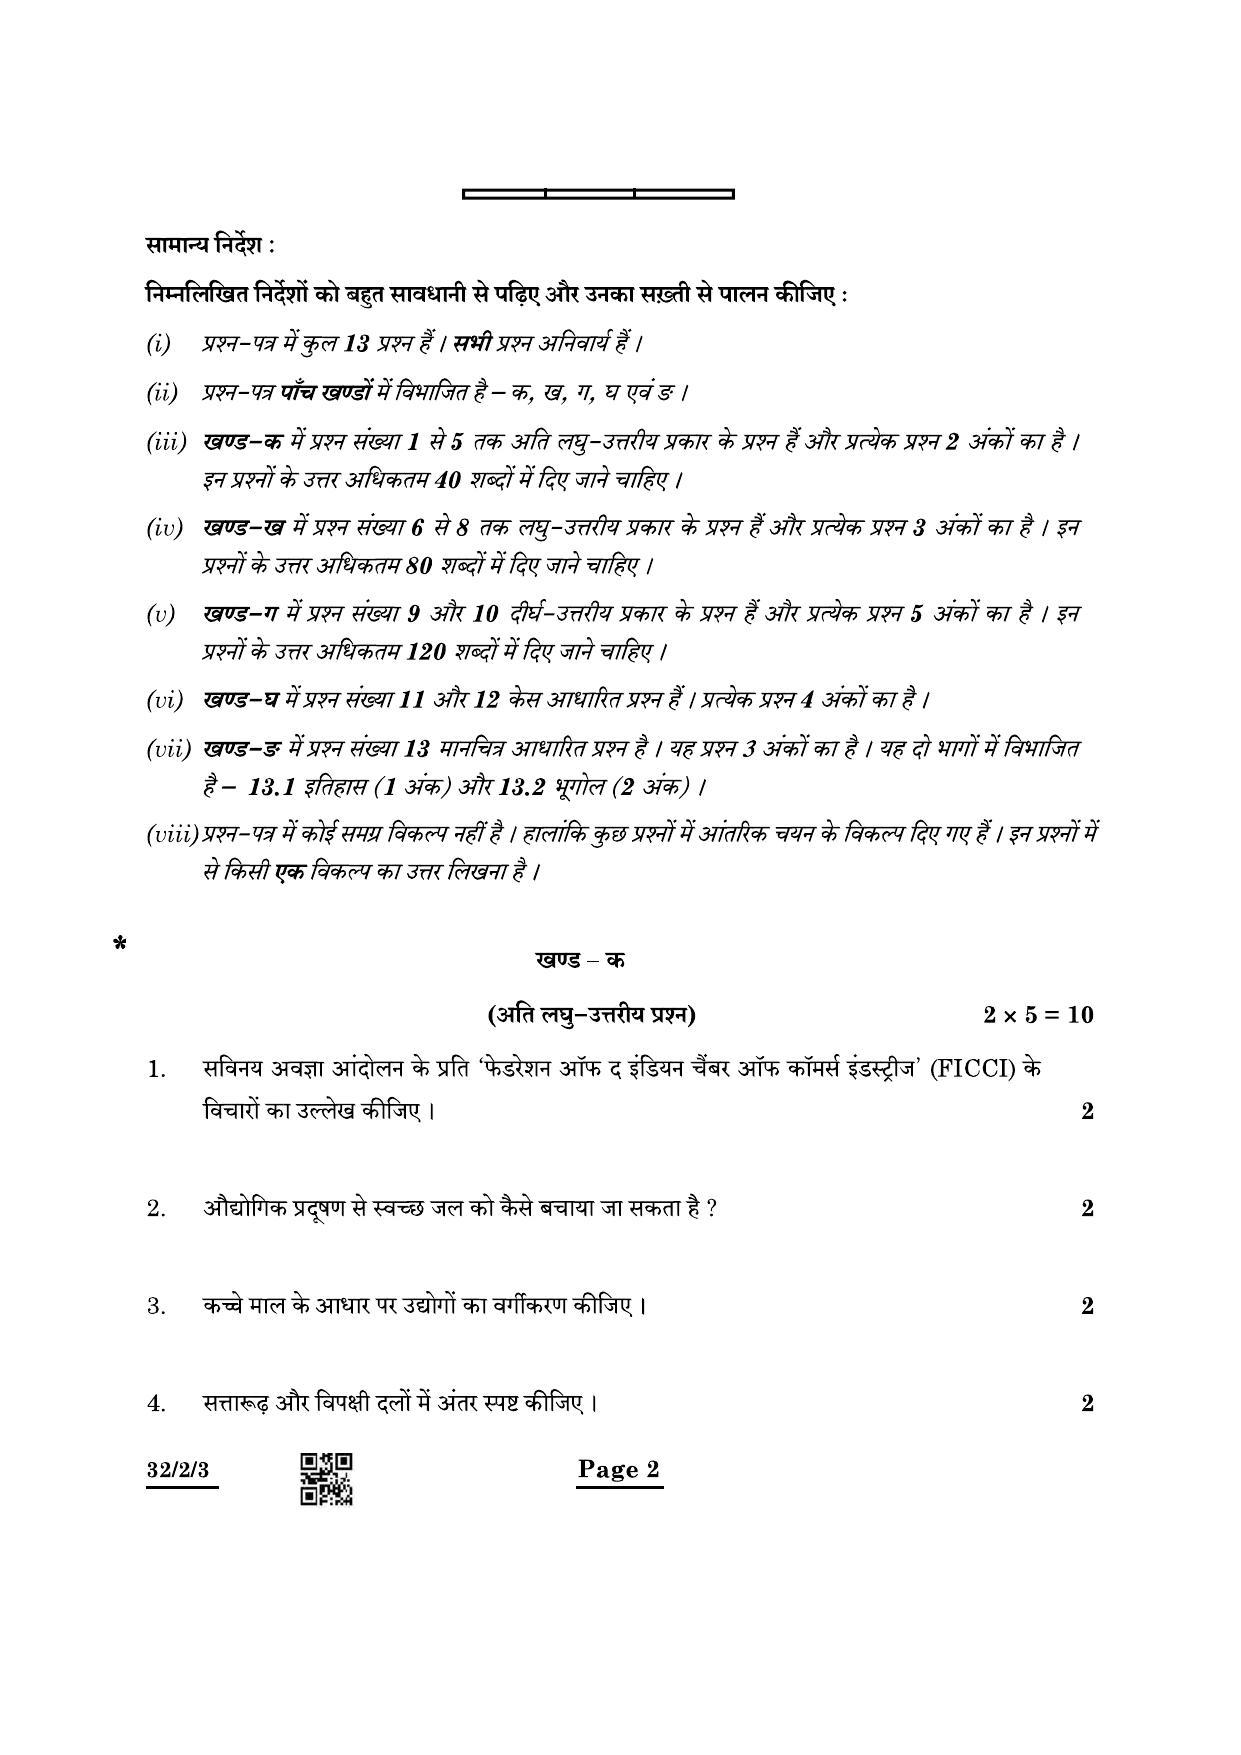 CBSE Class 10 32-2-3 Social Science 2022 Question Paper - Page 2